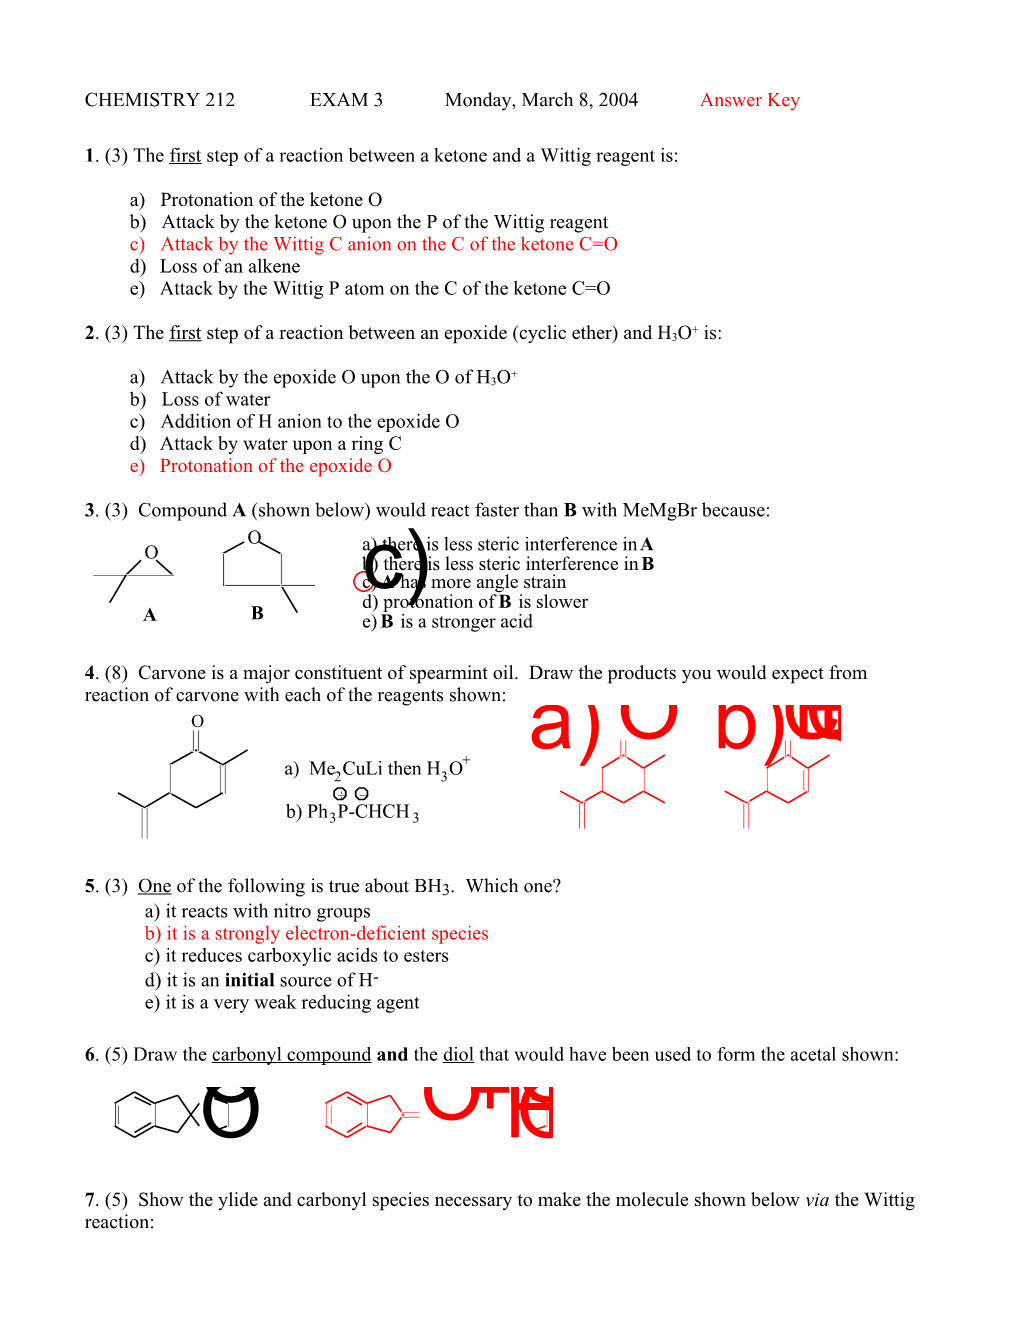 1. (3) the First Step of a Reaction Between a Ketone and a Wittig Reagent Is